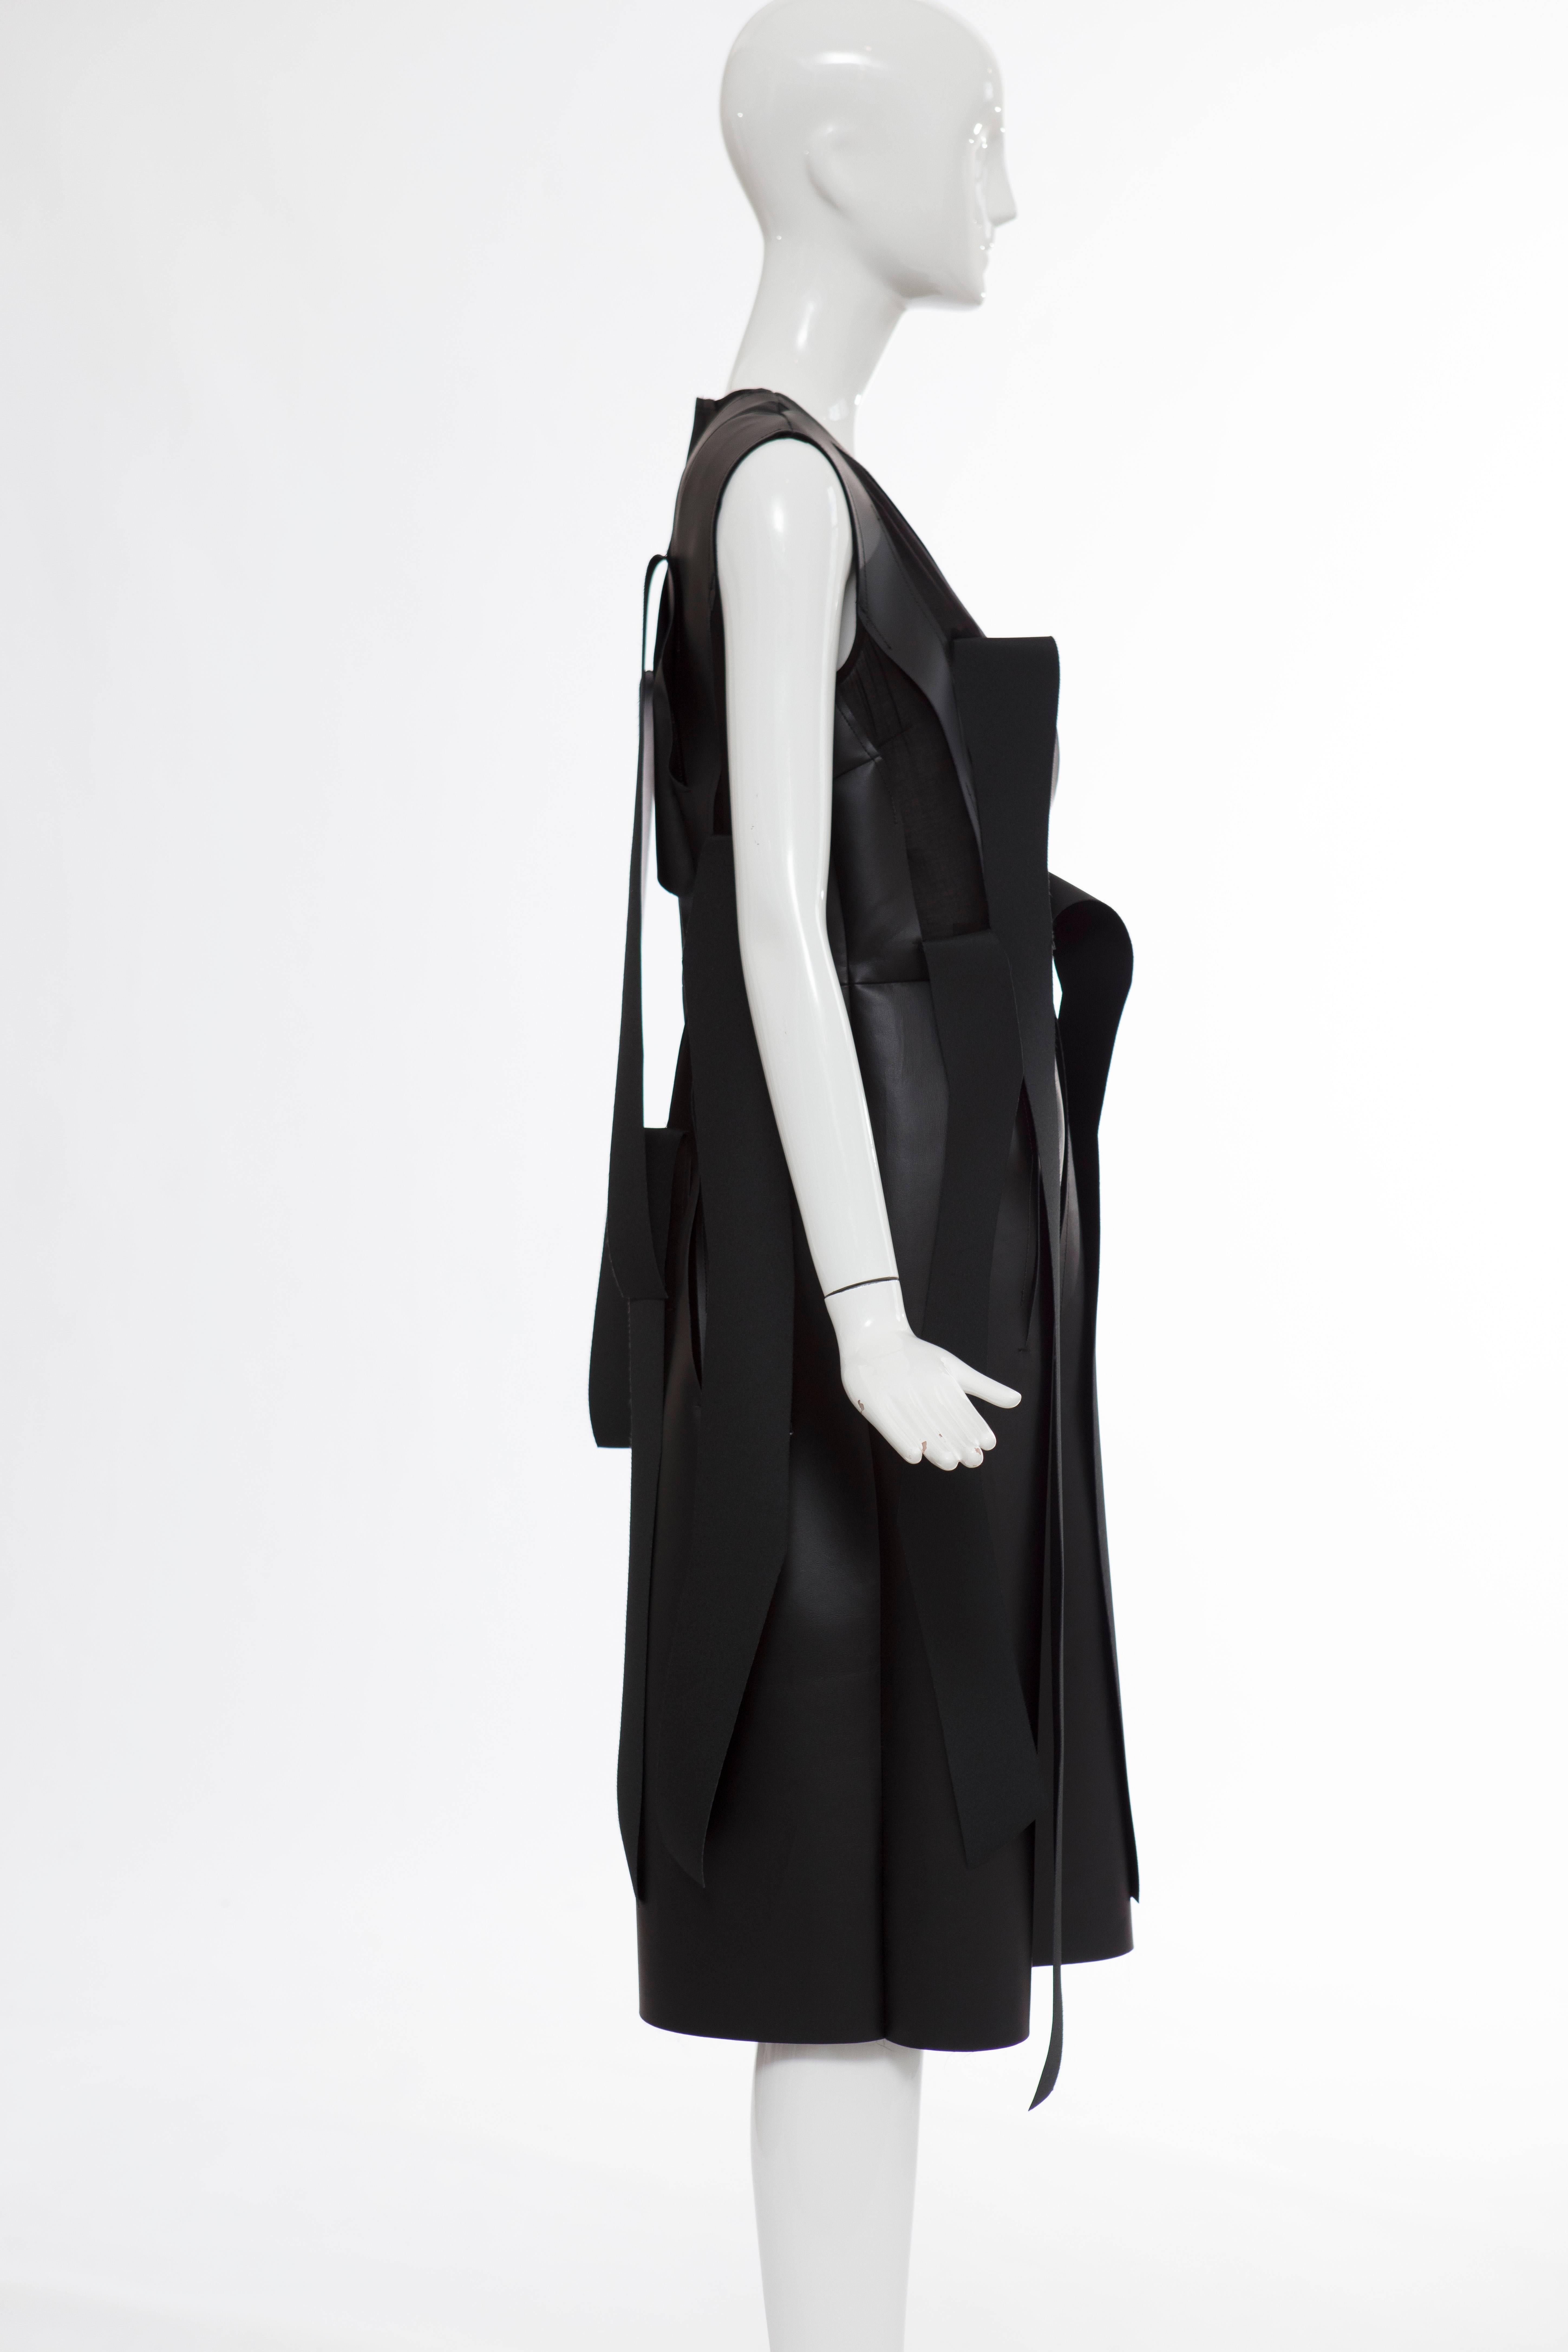 Women's Comme des Garcons Black Synthetic Leather With Cutout Strips Dress, Circa 2014